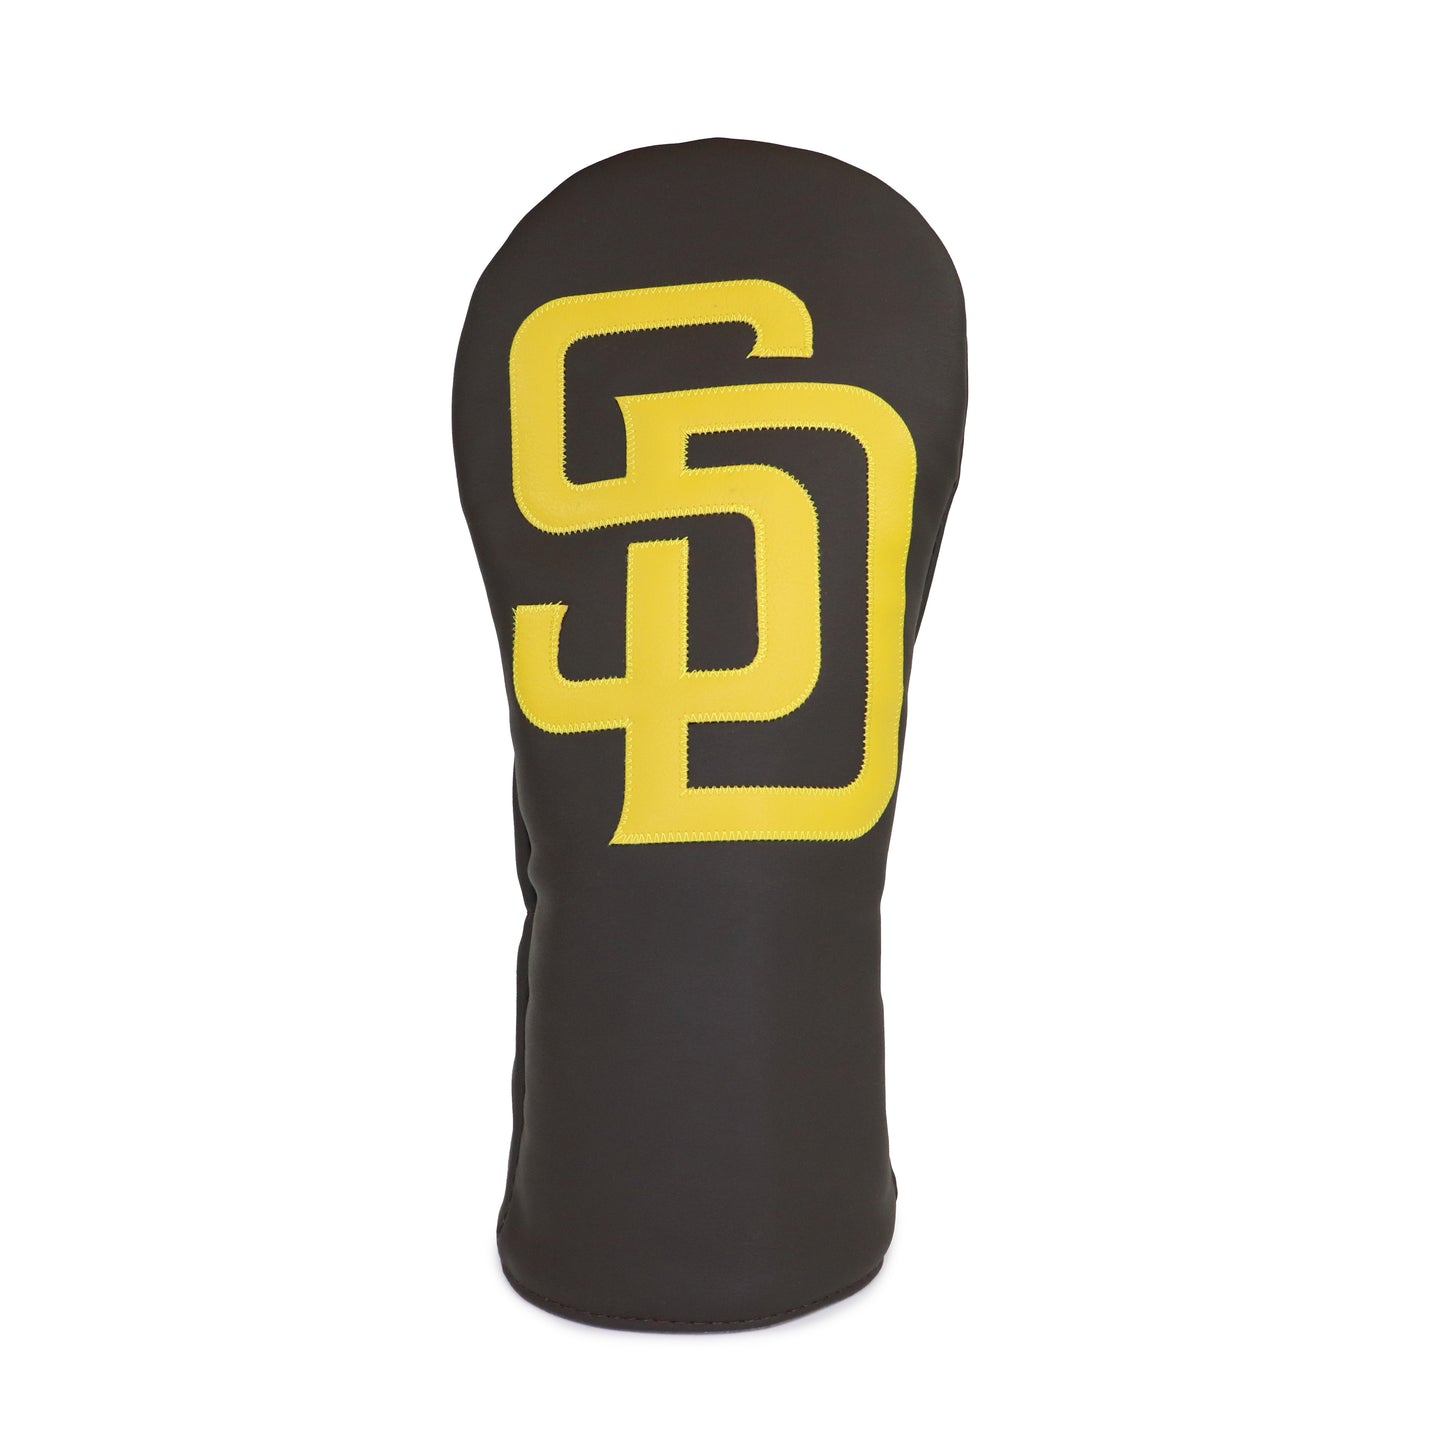 San Diego Padres Studio Pinstripe Blade Putter Cover